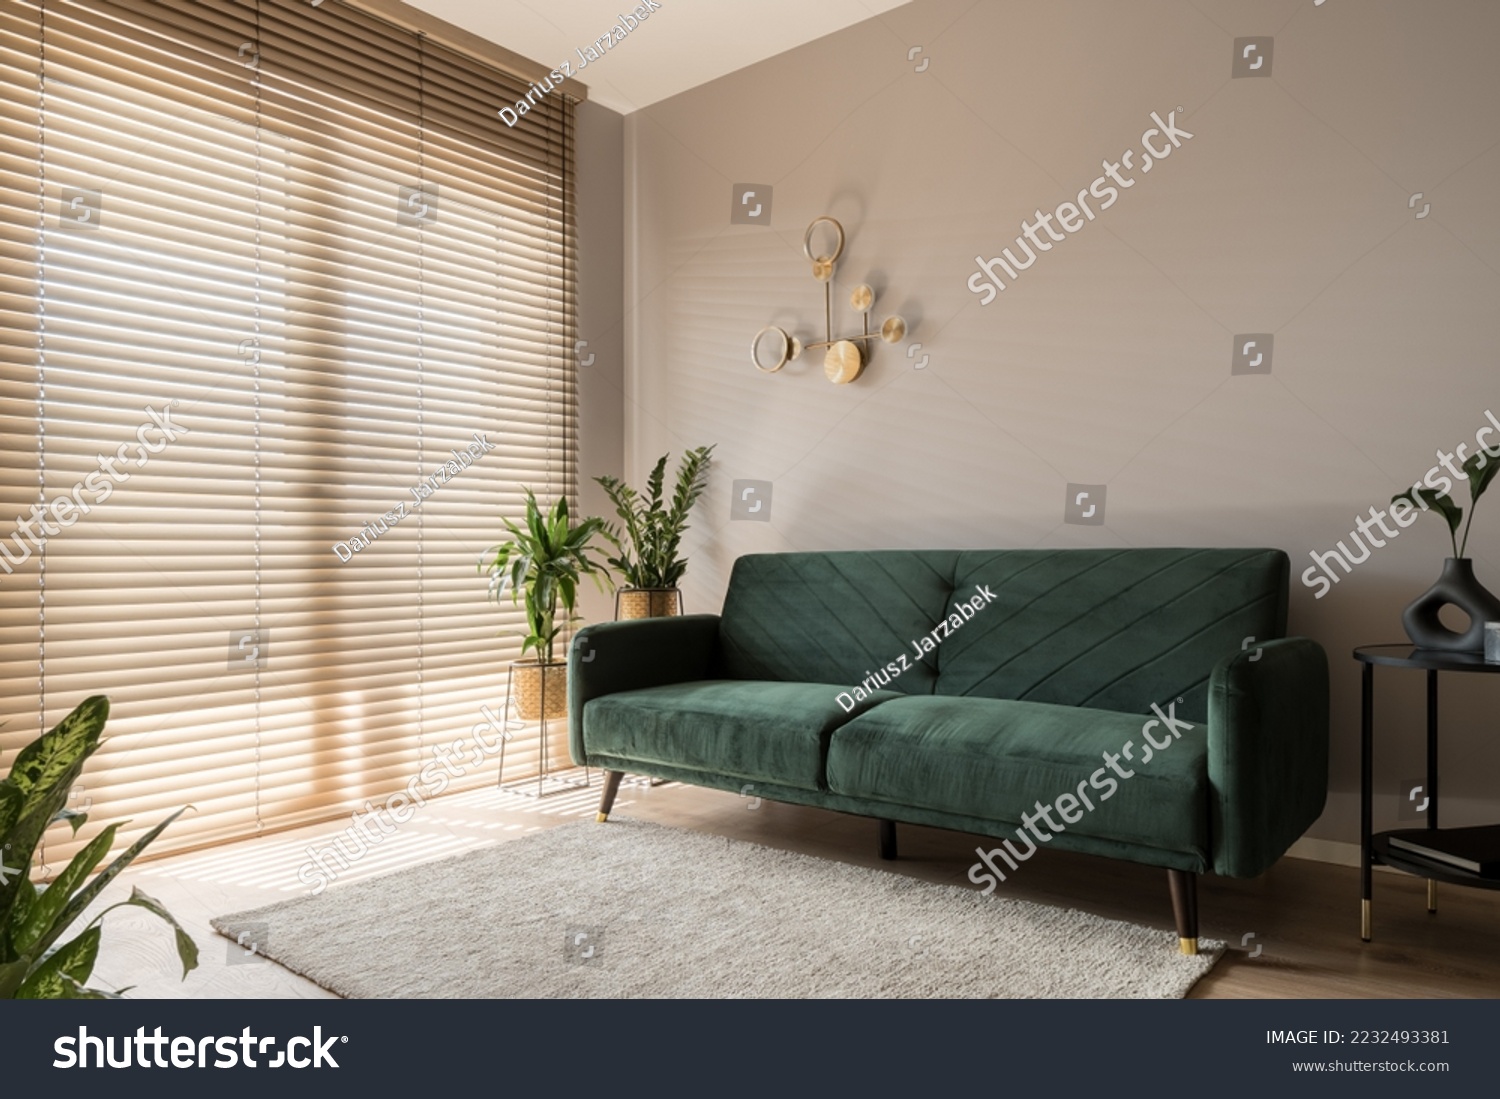 Elegant living room with big window wall behind wooden blinds, comfortable green sofa, carpet and decorative gold wall lamp #2232493381